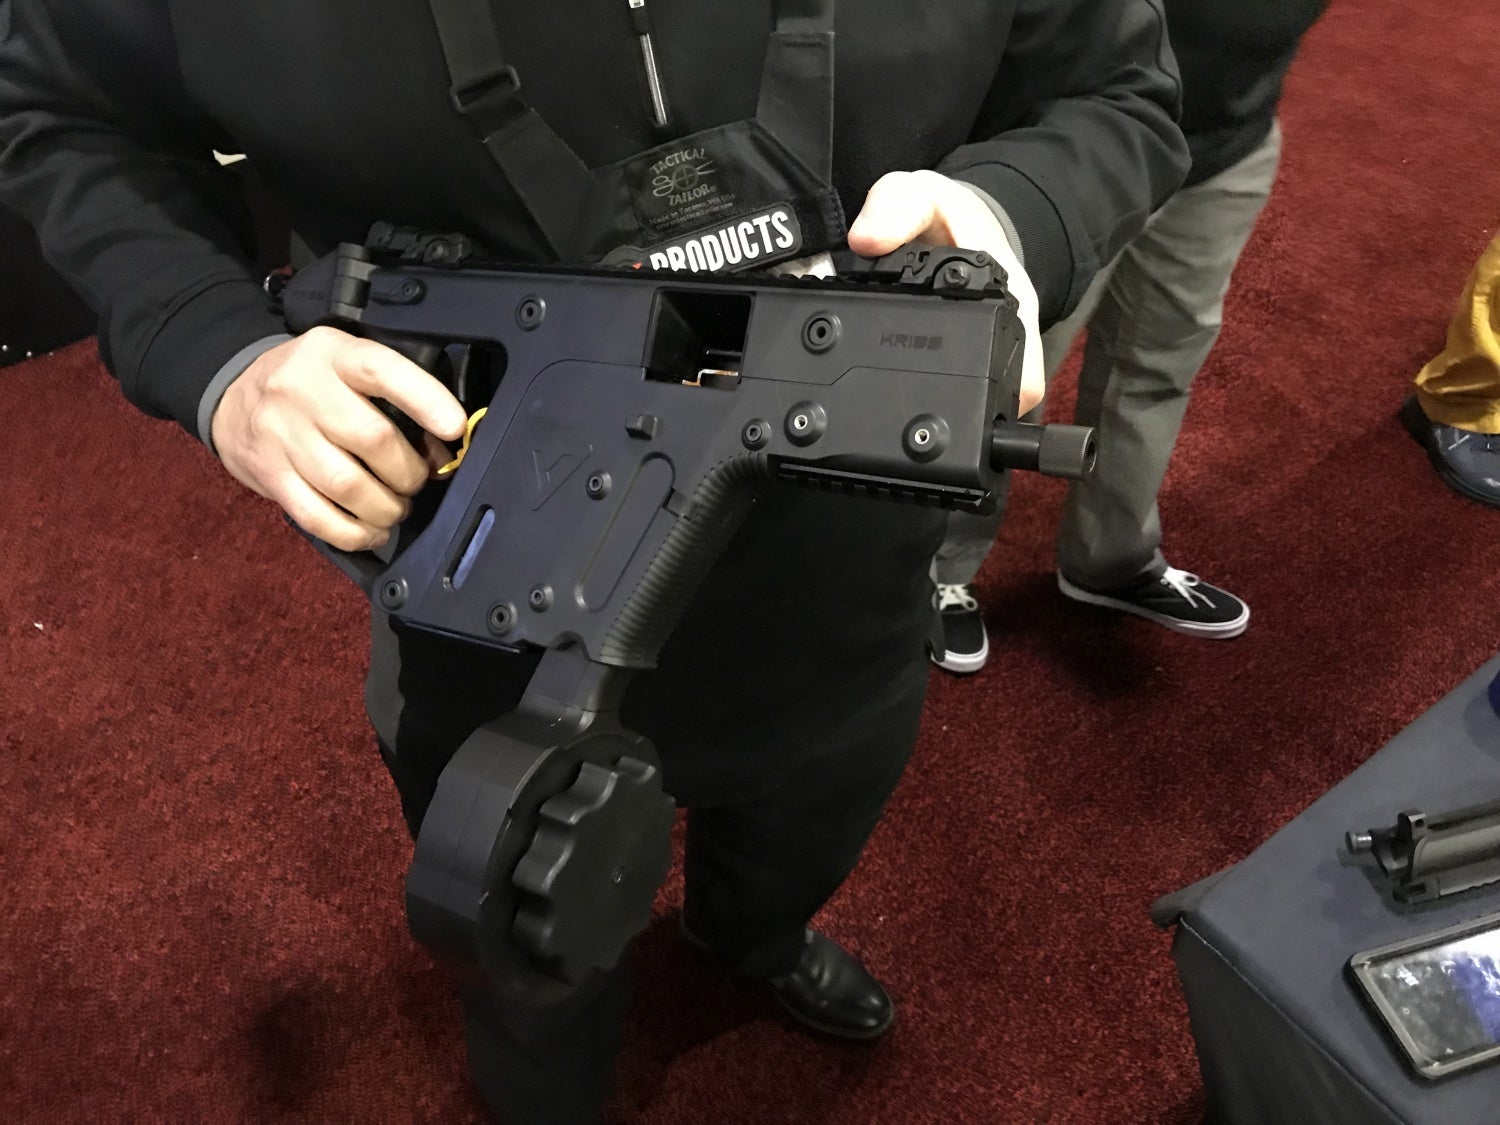 So it will work for the KRISS VECTOR. 